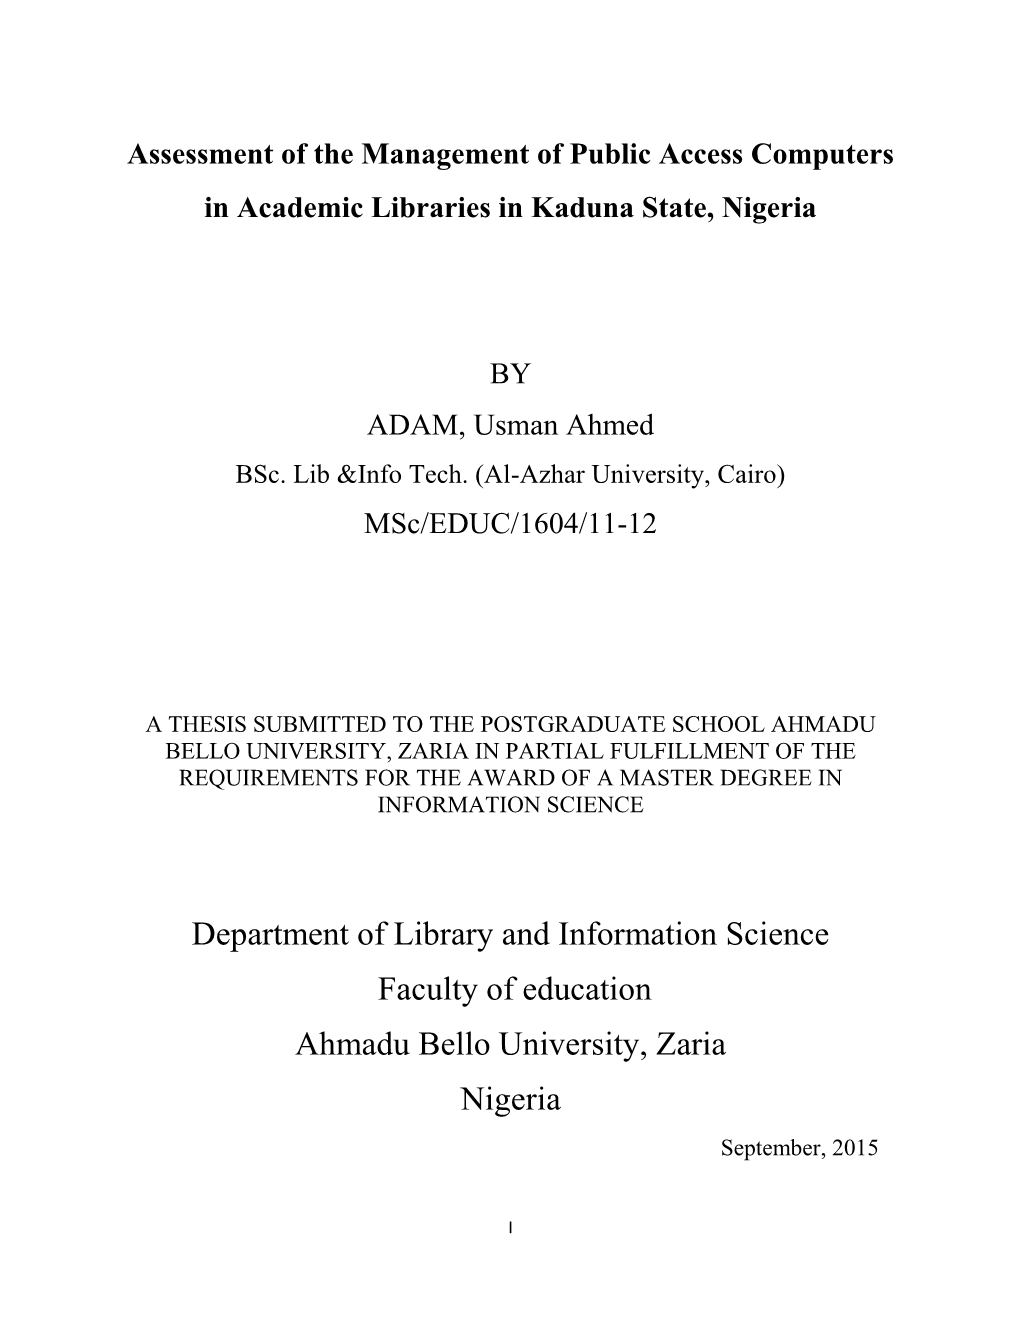 Department of Library and Information Science Faculty of Education Ahmadu Bello University, Zaria Nigeria September, 2015